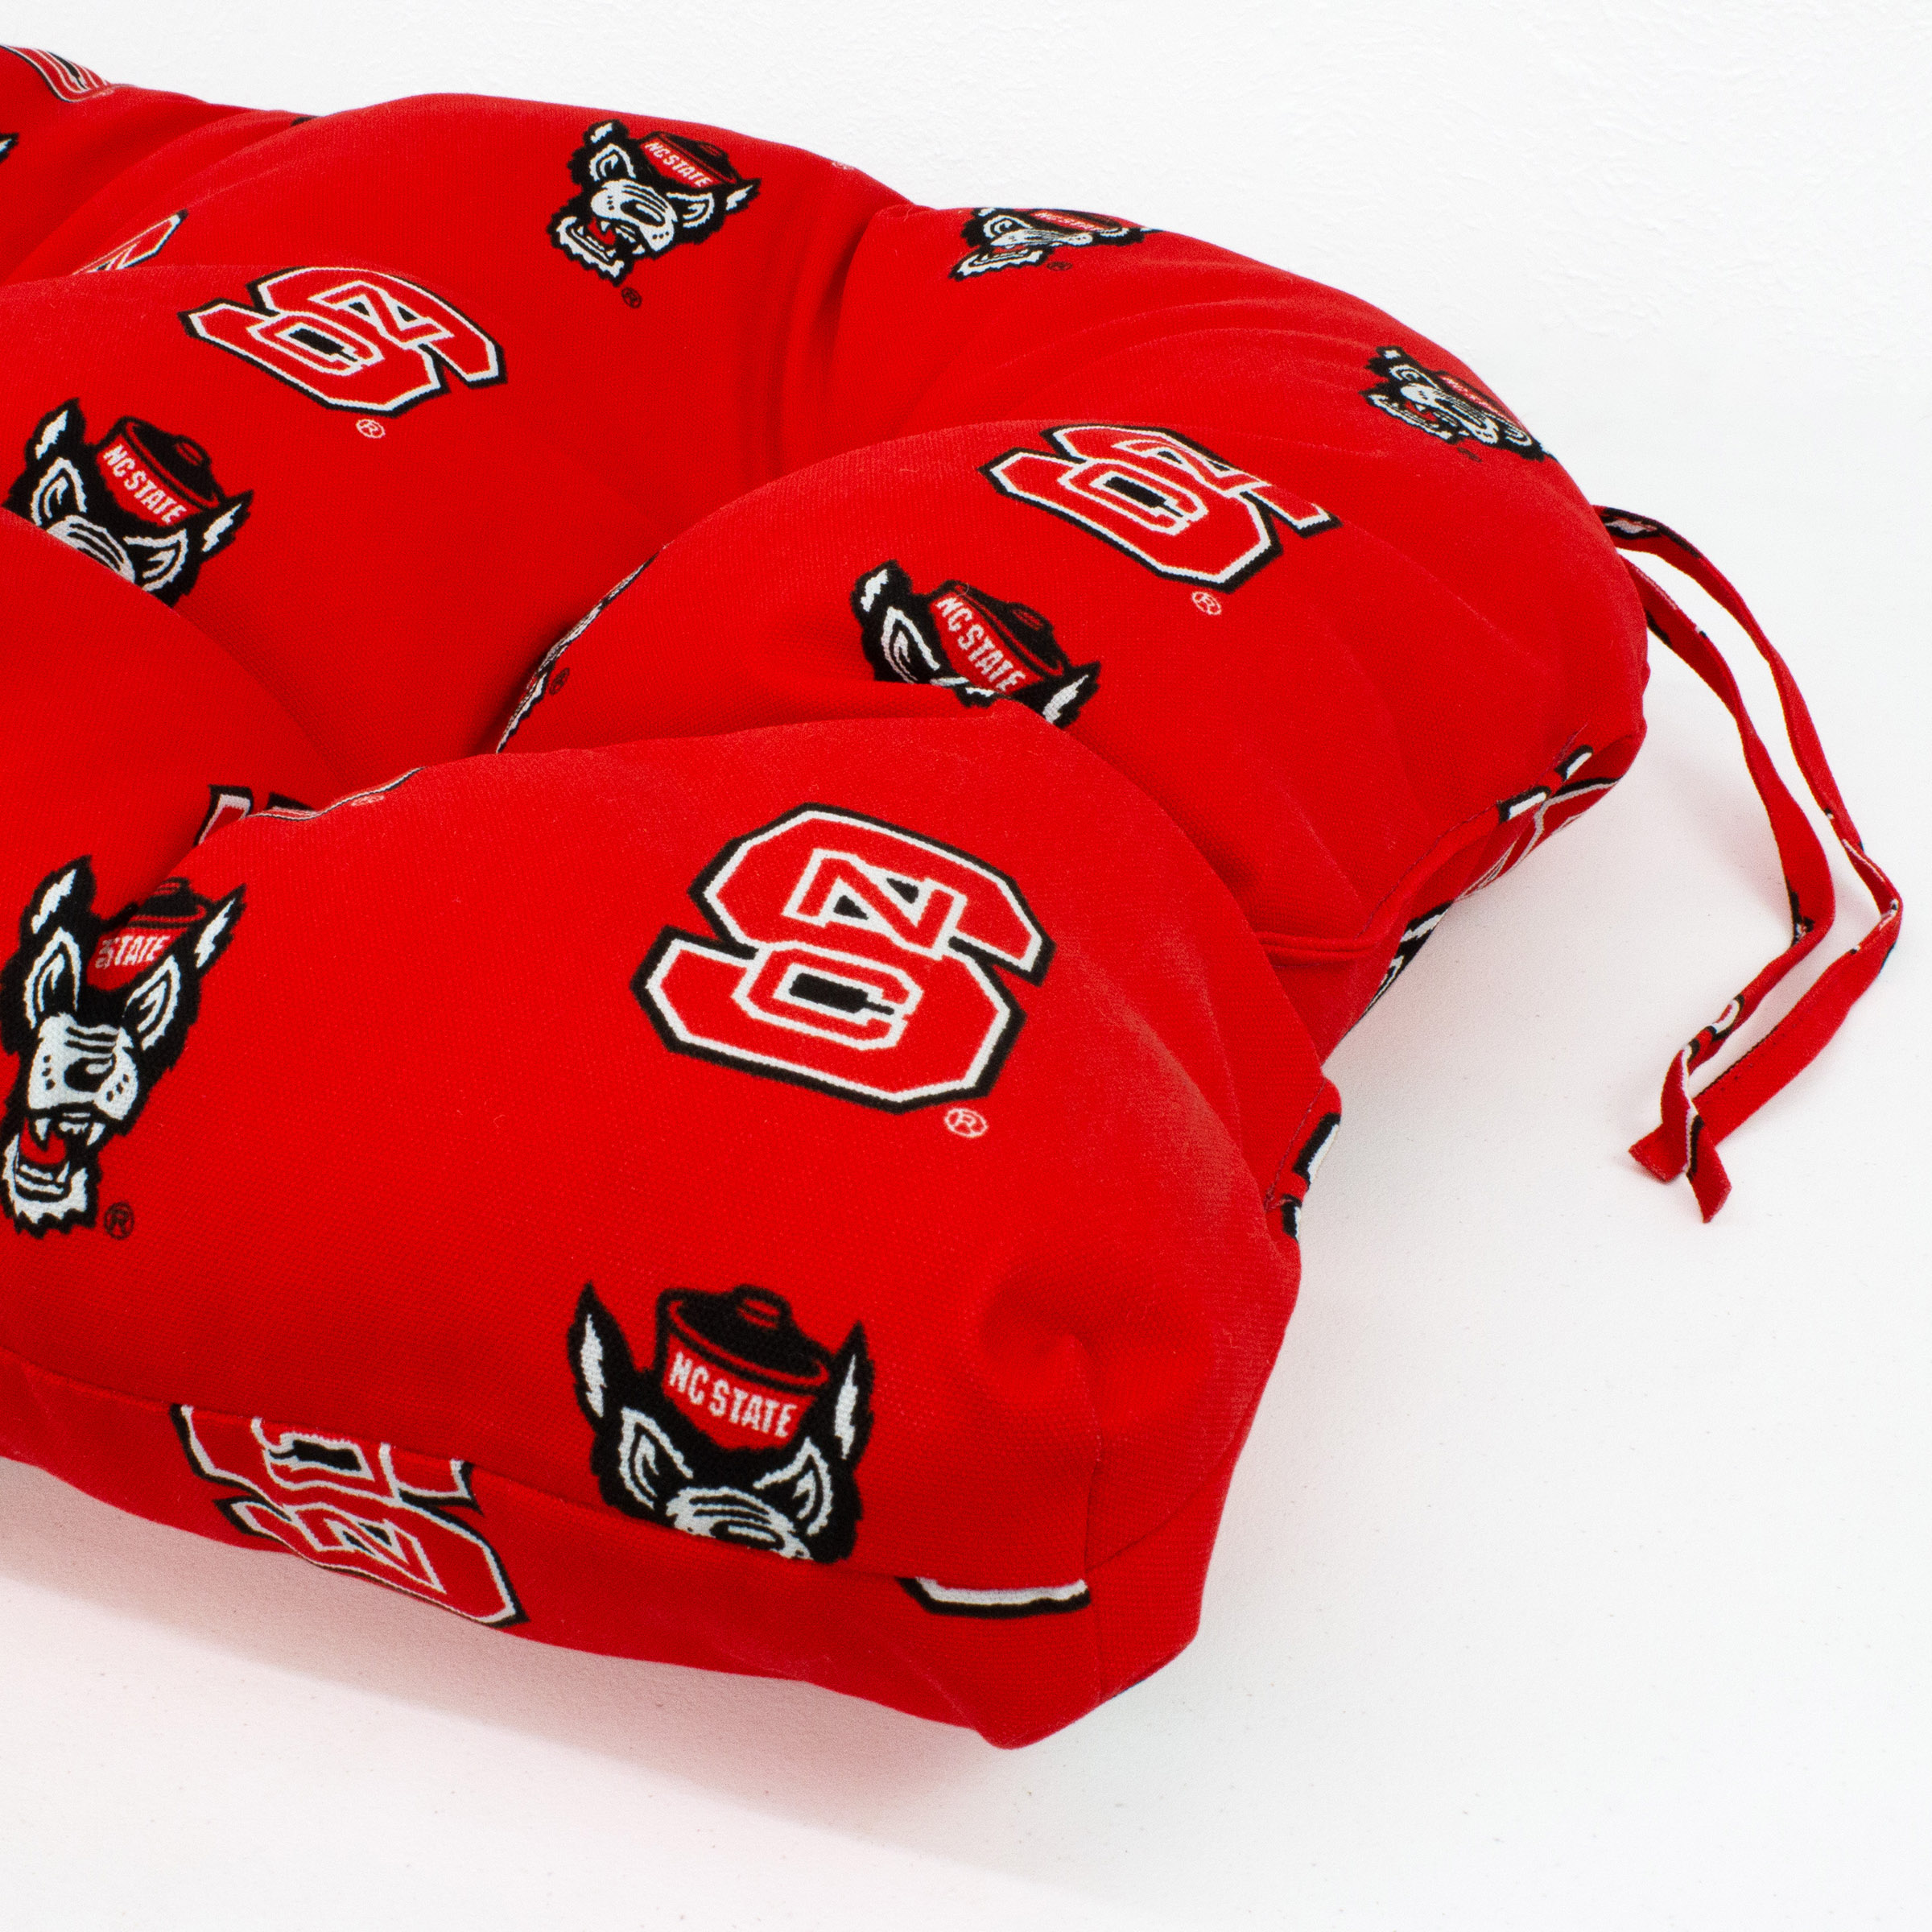 College Covers North Carolina State Wolf pack Settee Cushion, 20 x 46 - image 5 of 7